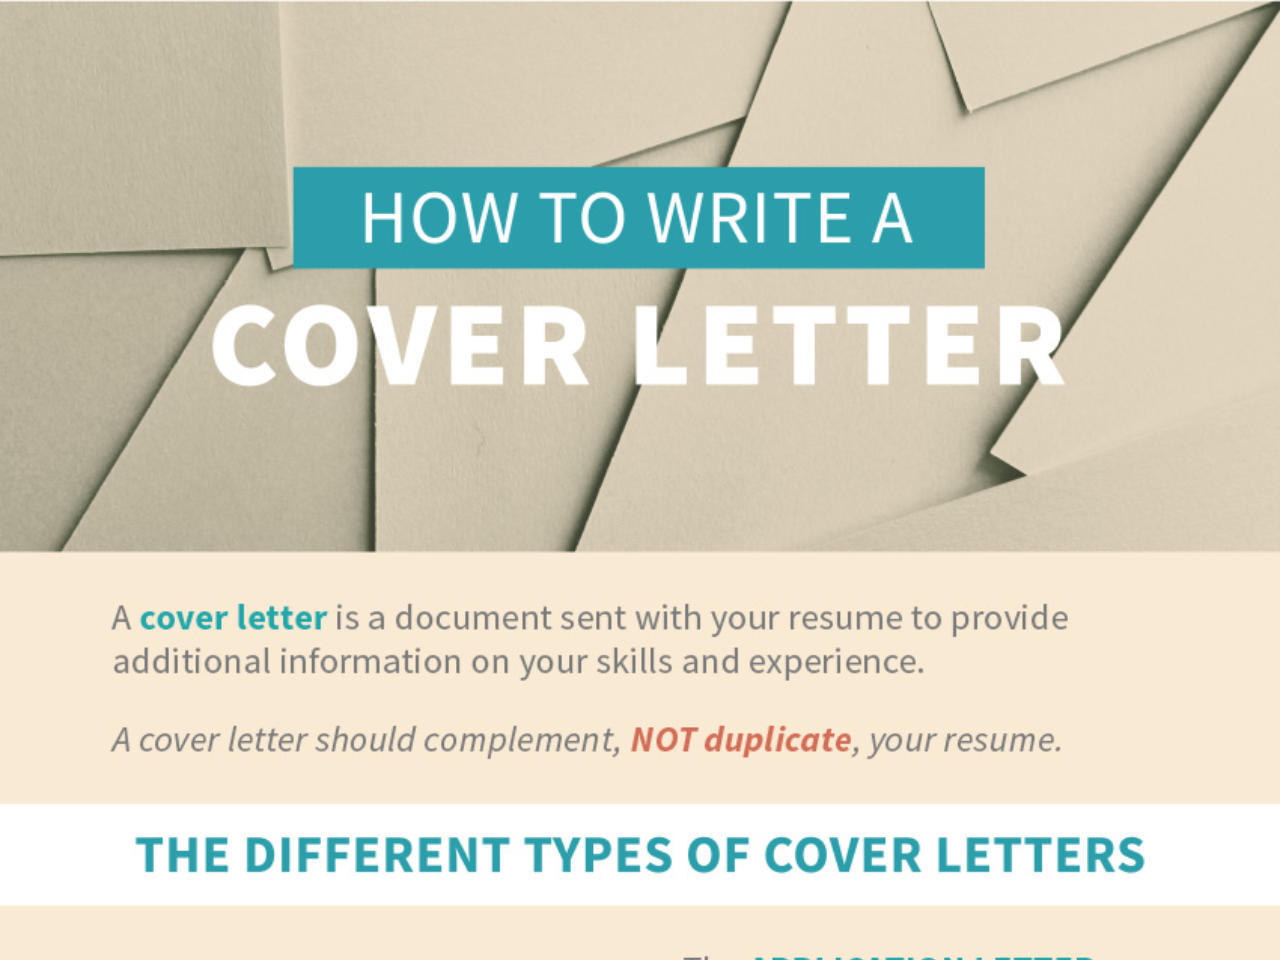 How To Write A Cover Letter? [InfoGraphic]